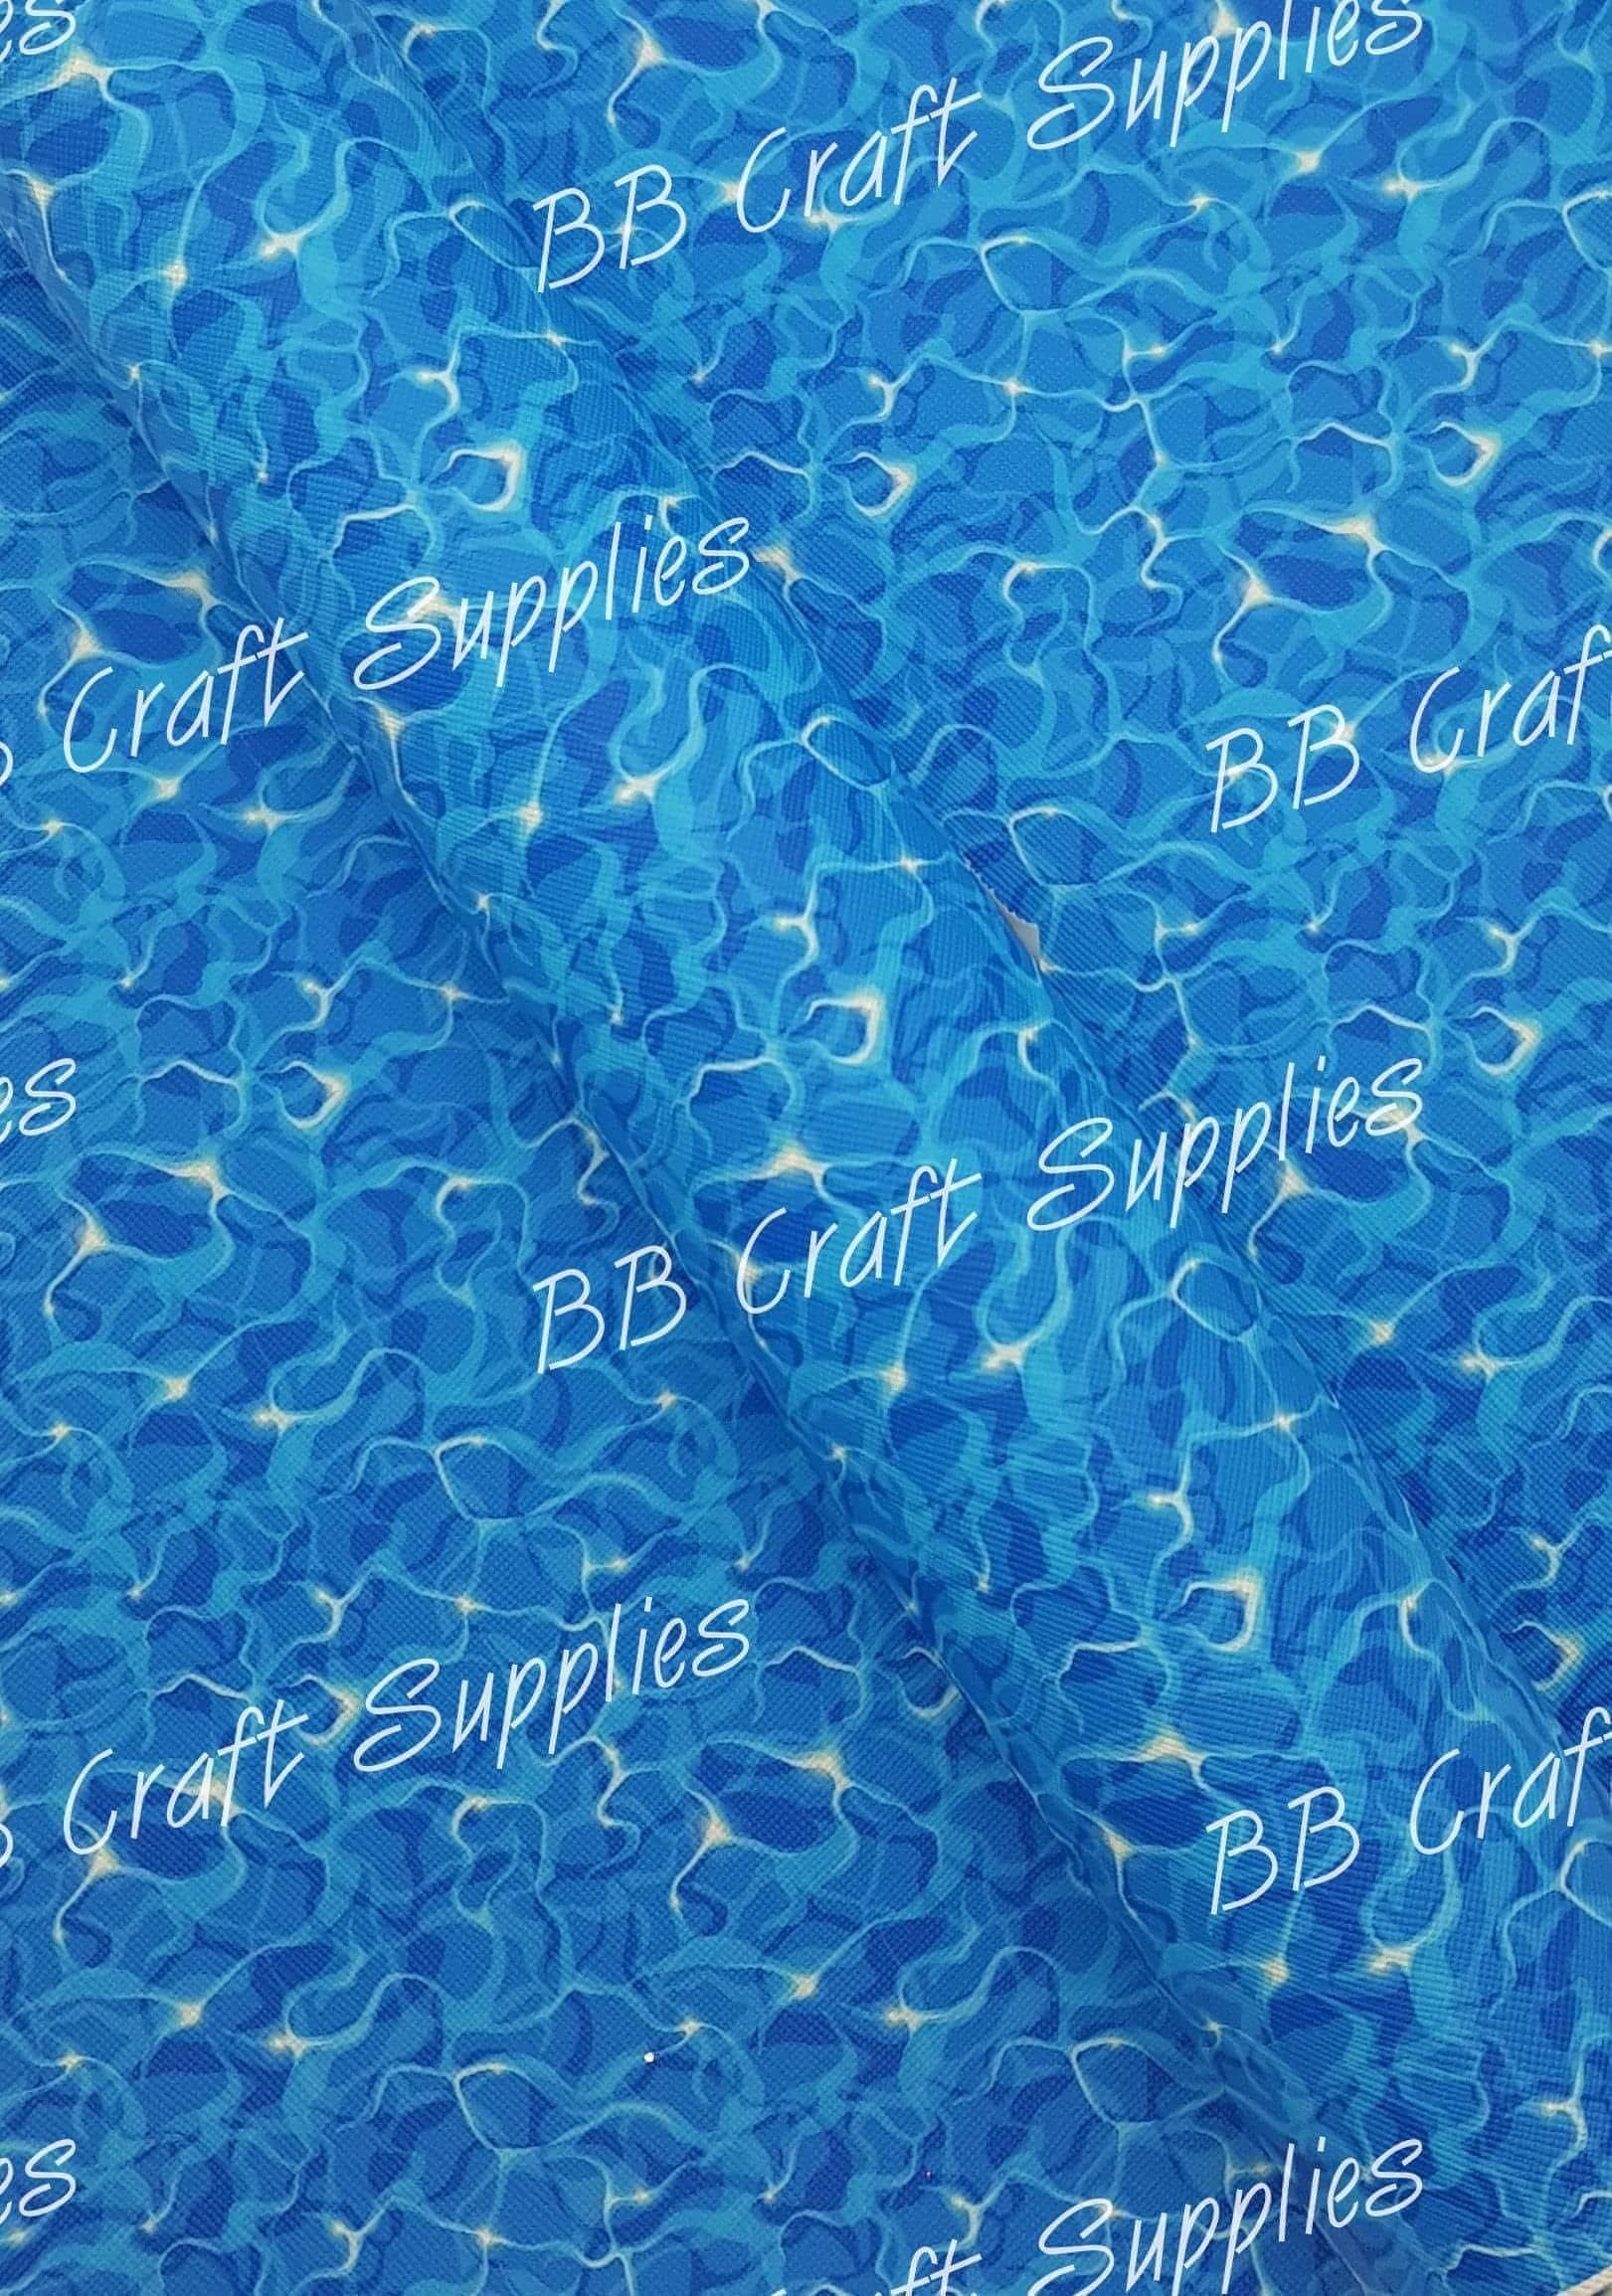 Sparkling Water Faux Leather - Character, Faux, Faux Leather, fun, Leather, leatherette, Pool, pool party, summer, swimming, water - Bare Butler Faux Leather Supplies 